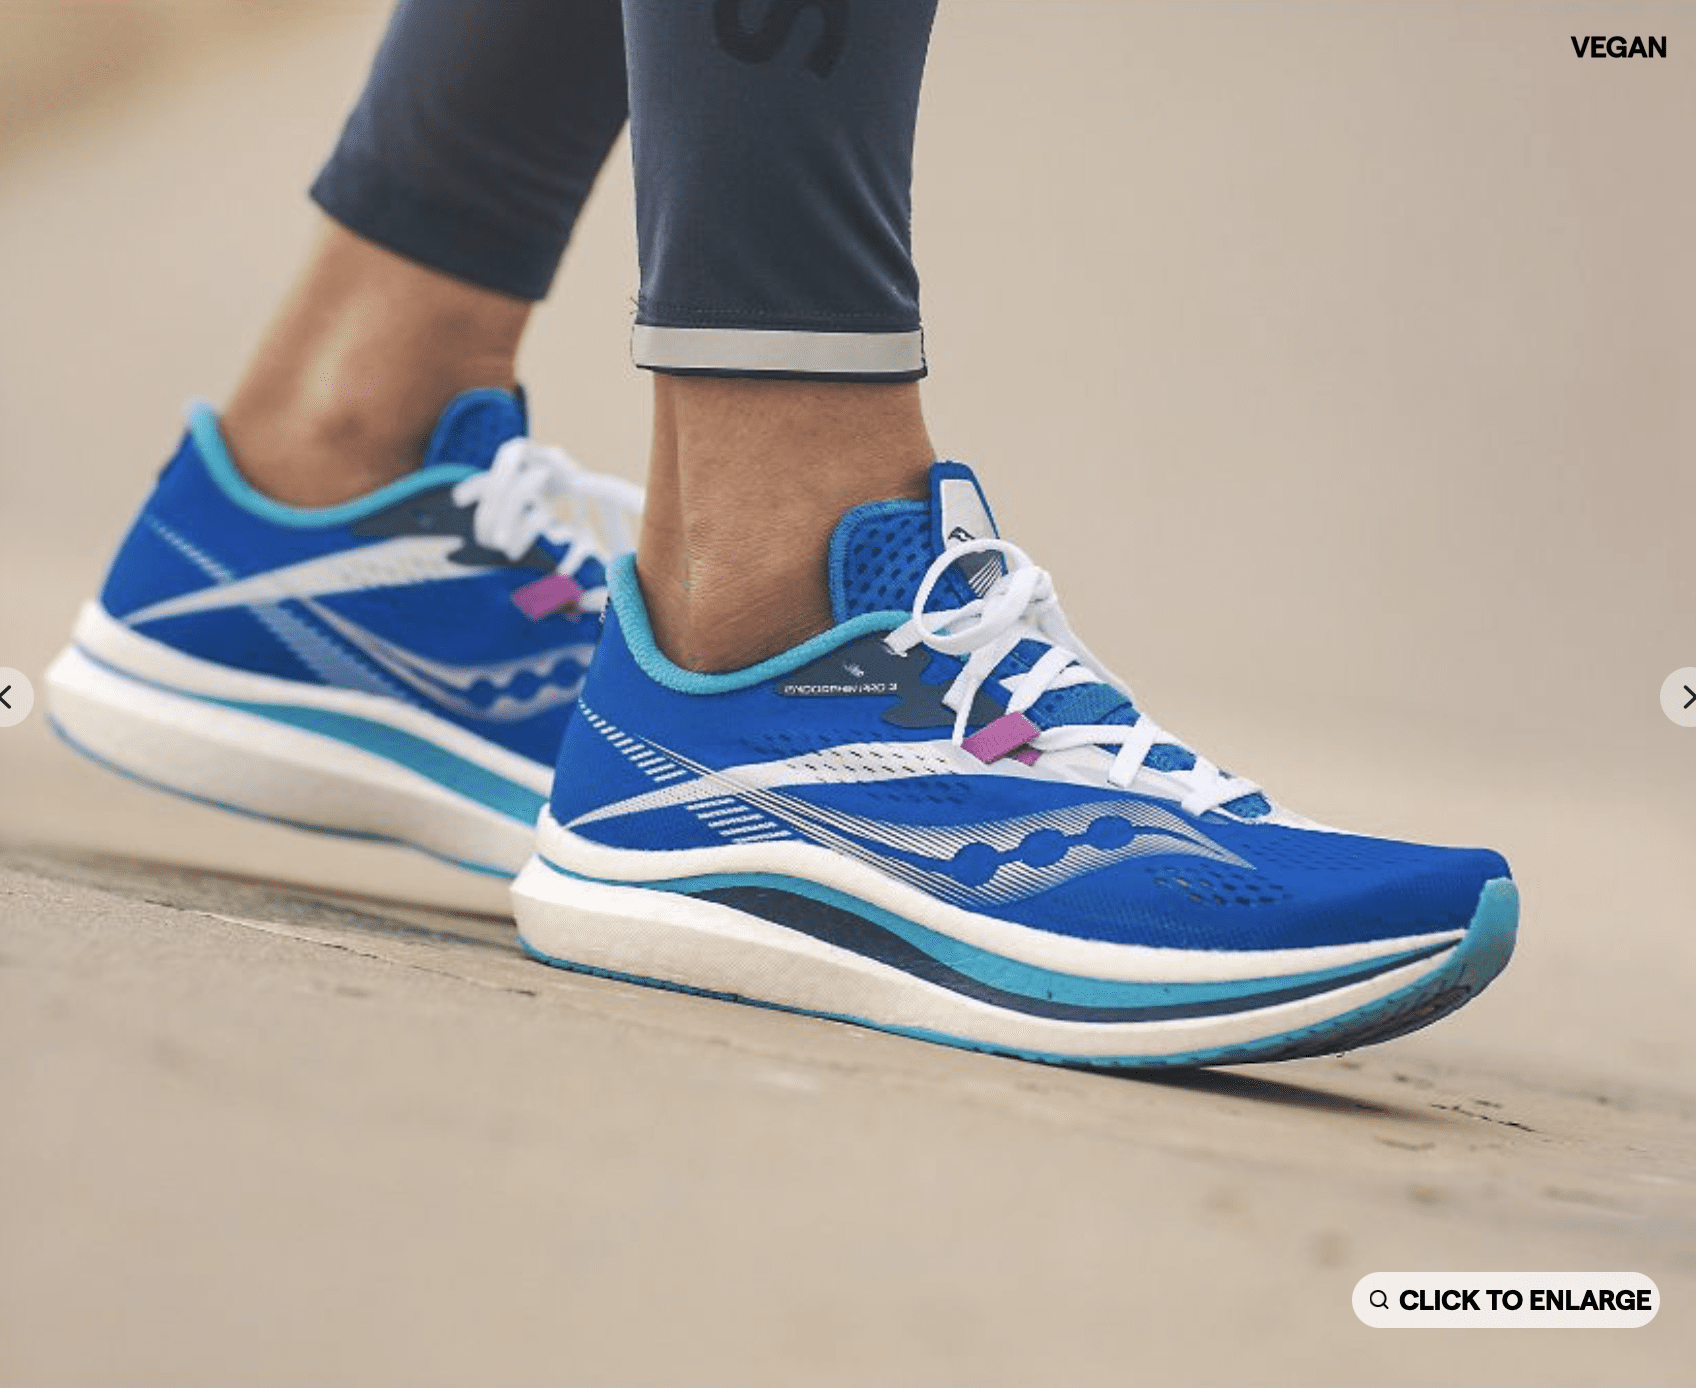 Saucony: Extra 30% off all sale styles